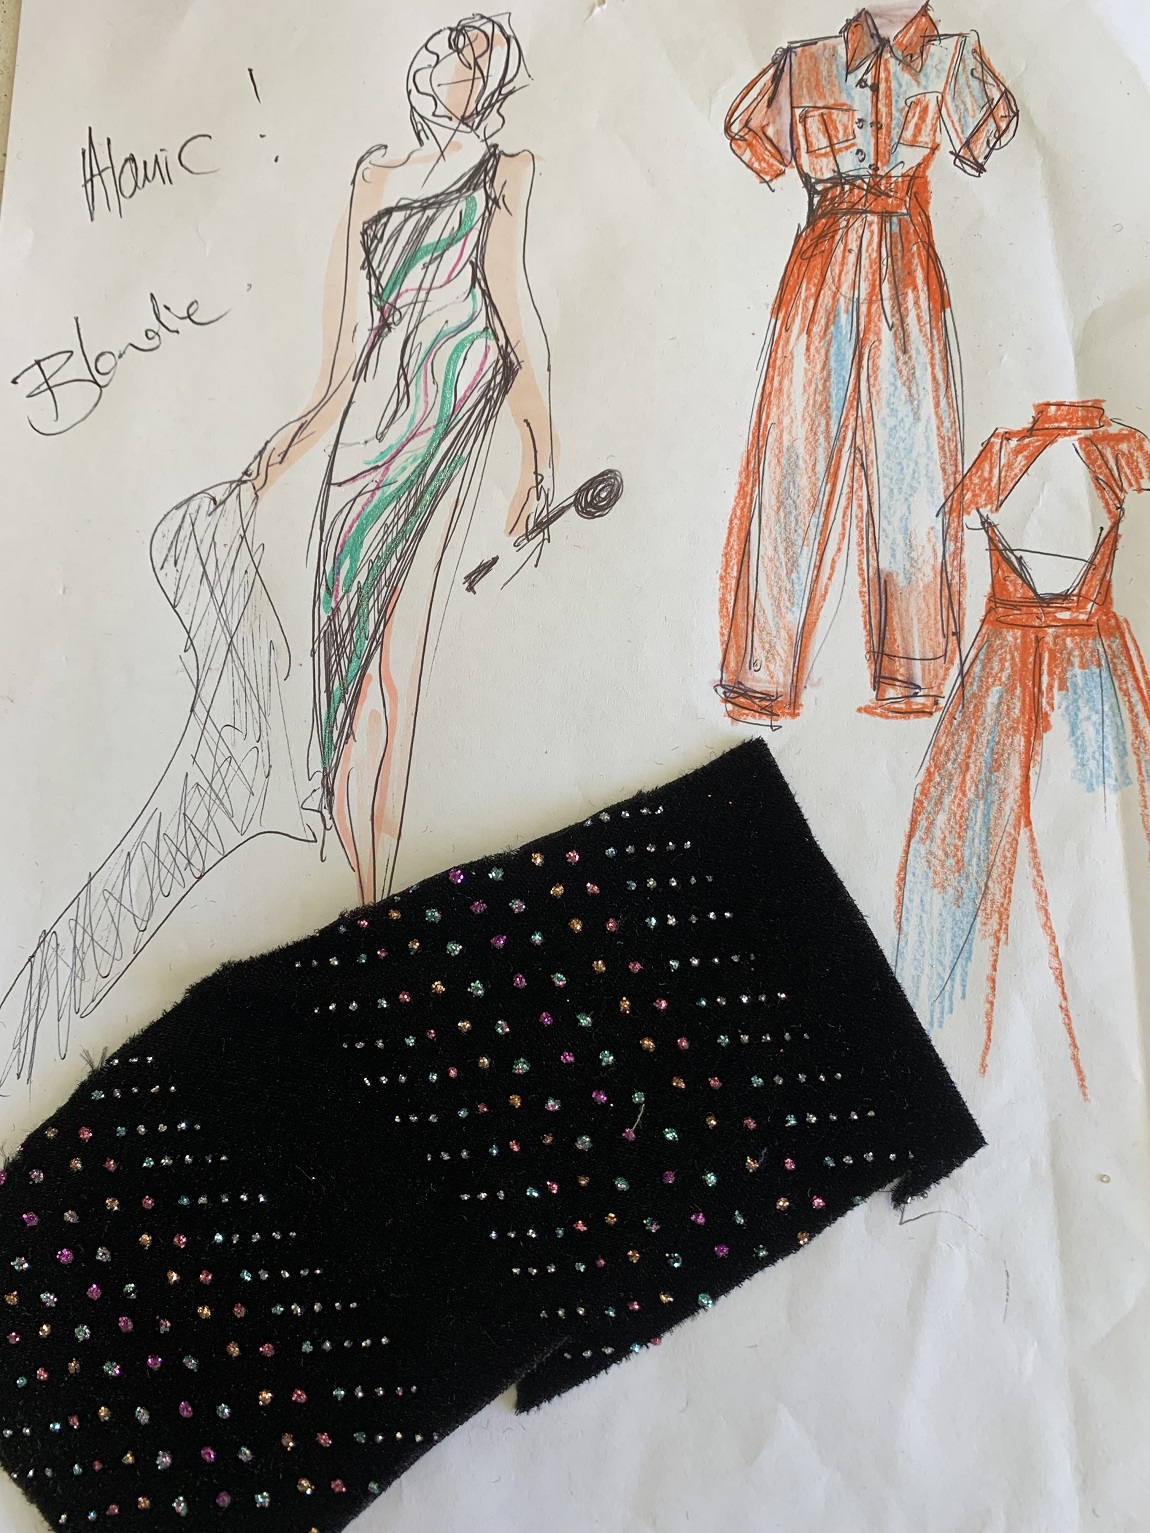 Outfit sketches and fabric samples for costumes to be worn by Deans during her Atomic tour.
 